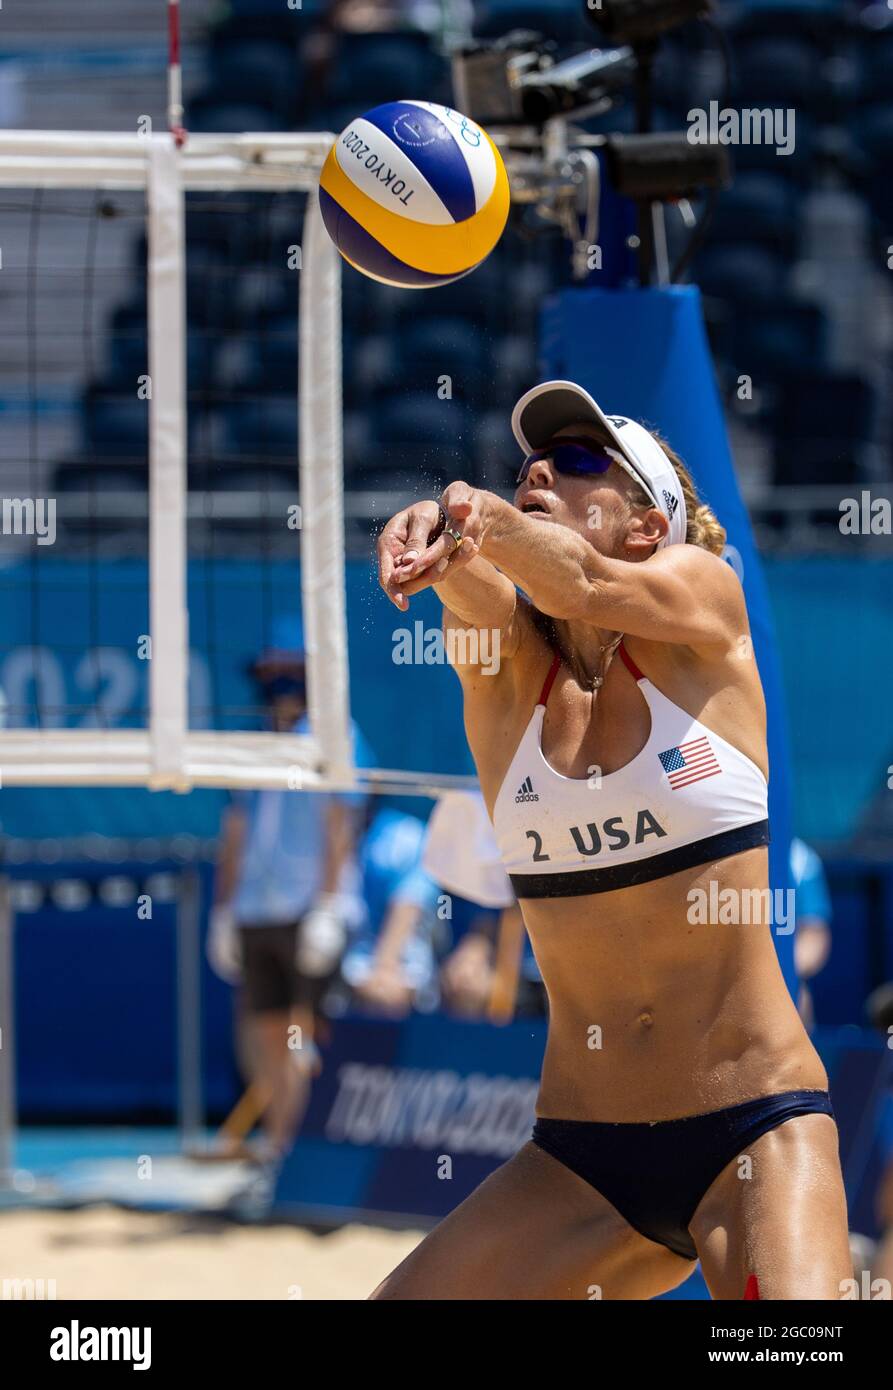 Tokyo, Kanto, Japan. 6th Aug, 2021. USA volleyball team player ALIX KLINEMAN, 31, competes in the Gold medal match for Women's Beach Volleyball at the Shiokaze Park during the 2020 Tokyo Summer Olympics. USA team of April Ross and Alix Klineman won the gold medal. (Credit Image: © Paul Kitagaki Jr./ZUMA Press Wire) Stock Photo